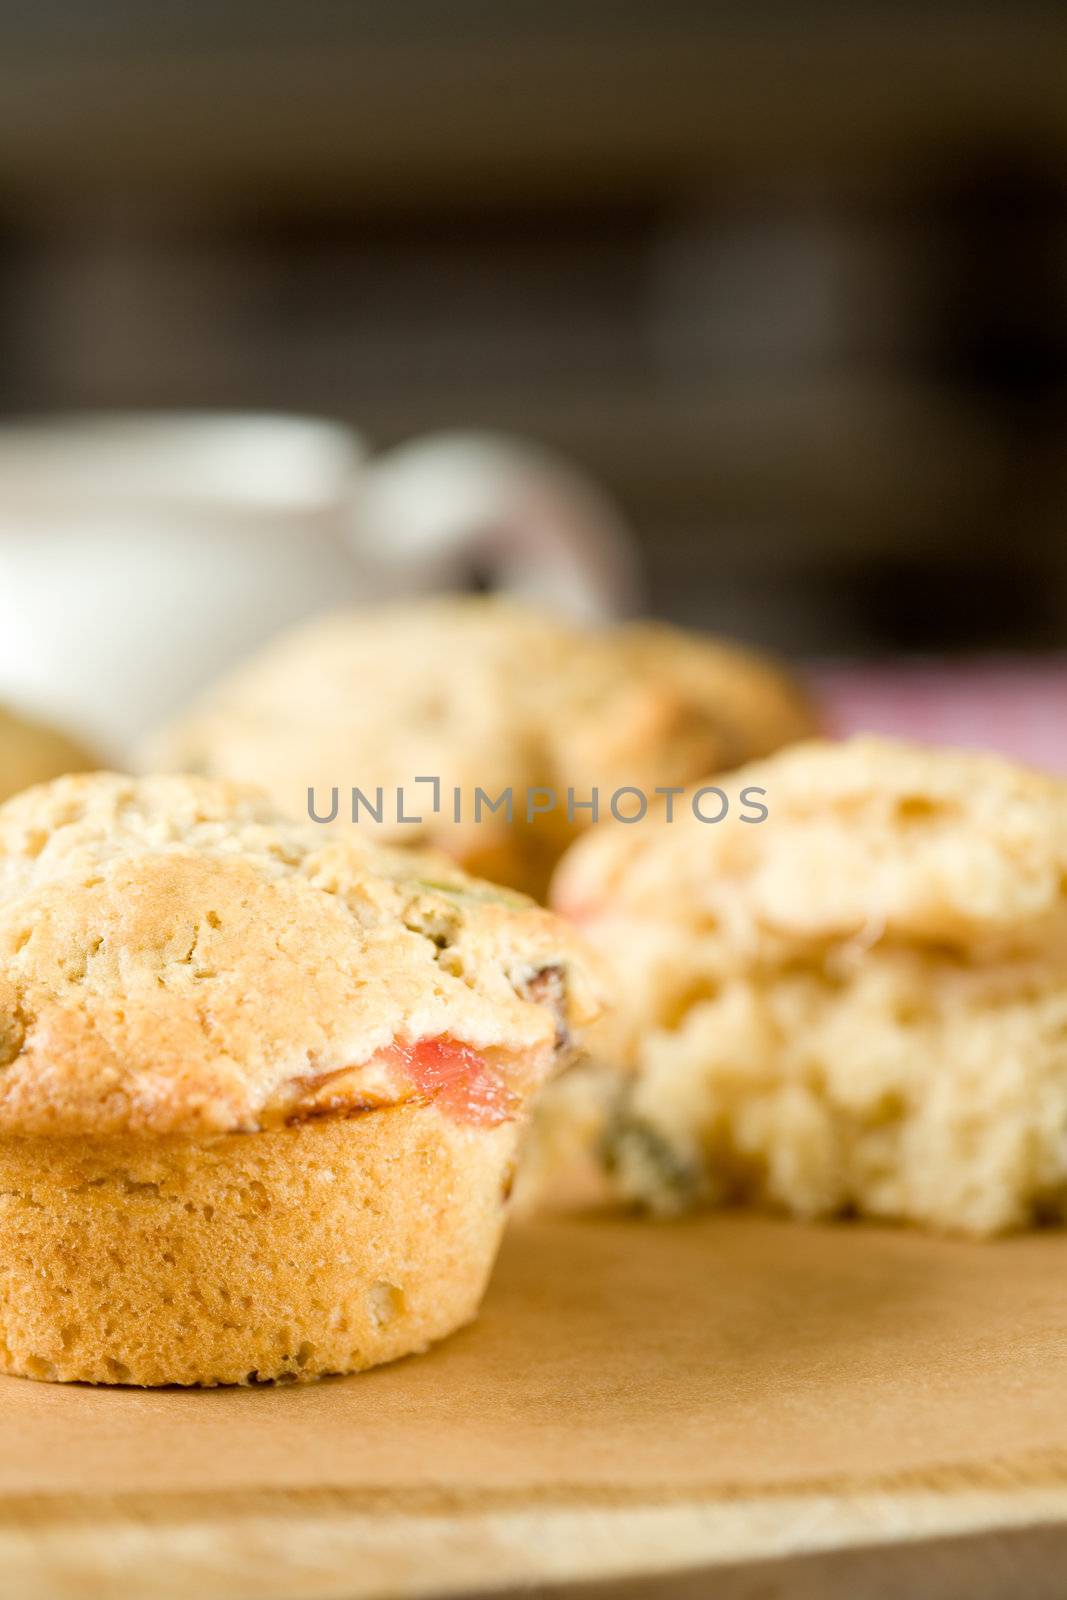 Delicious muffin filled with pistachio nuts and rhubarb